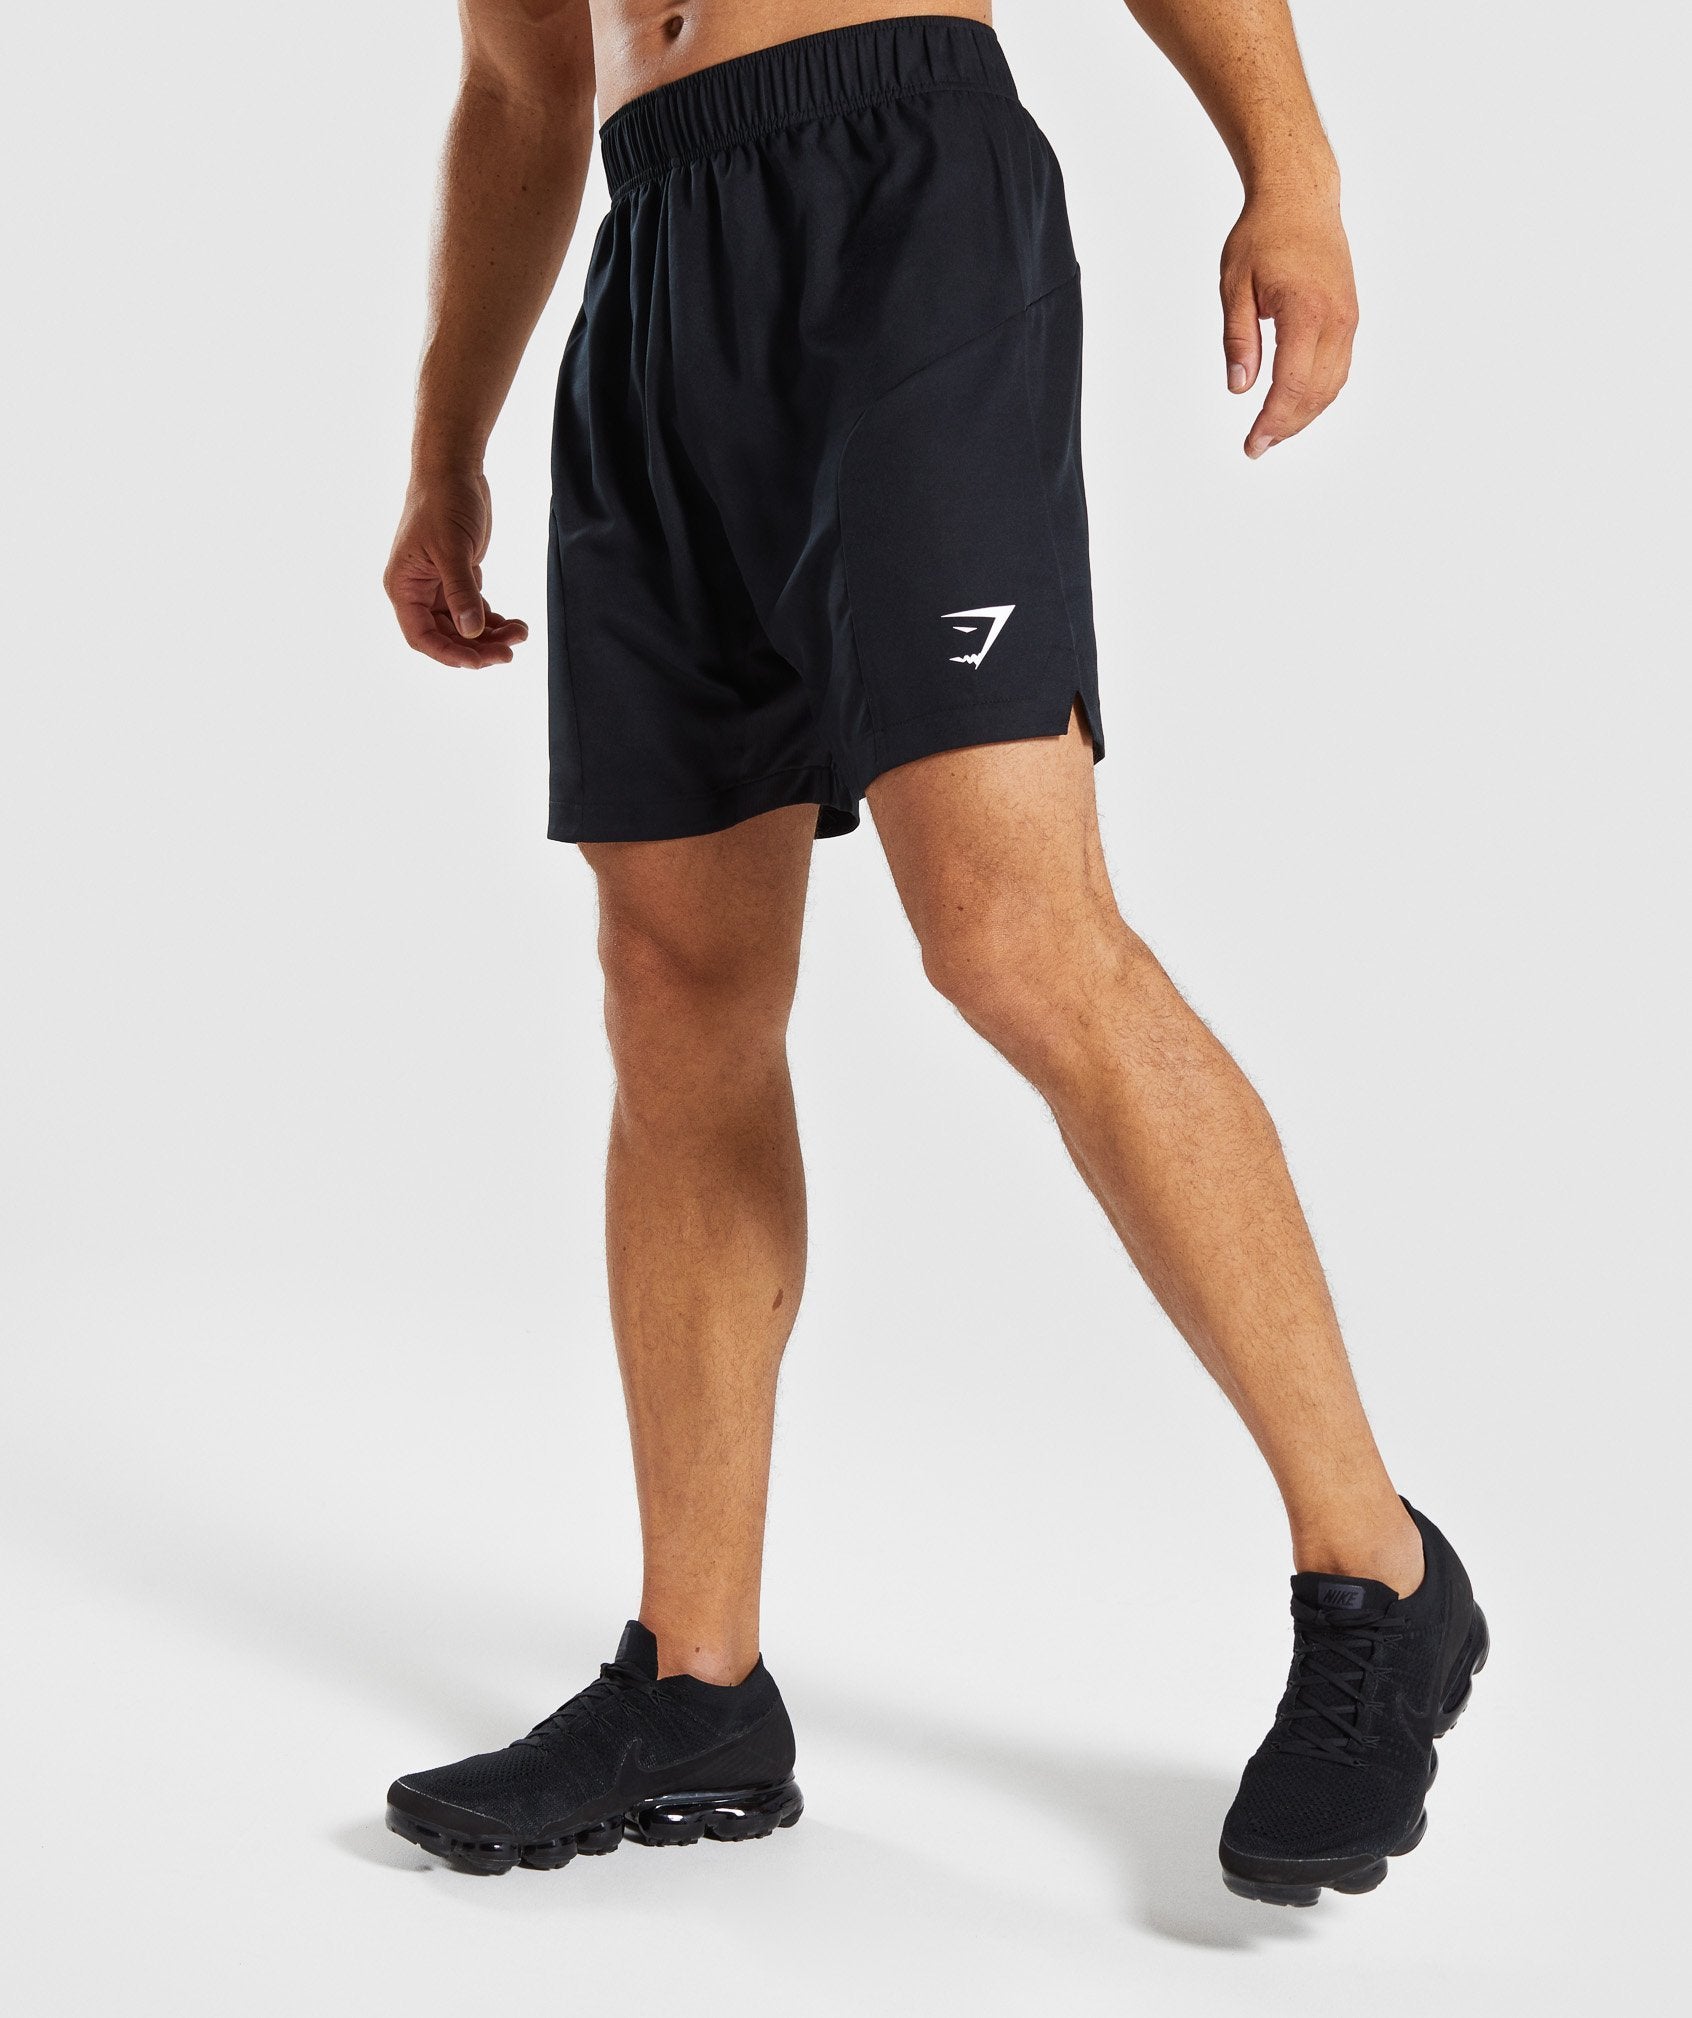 Primary Shorts in Black - view 3